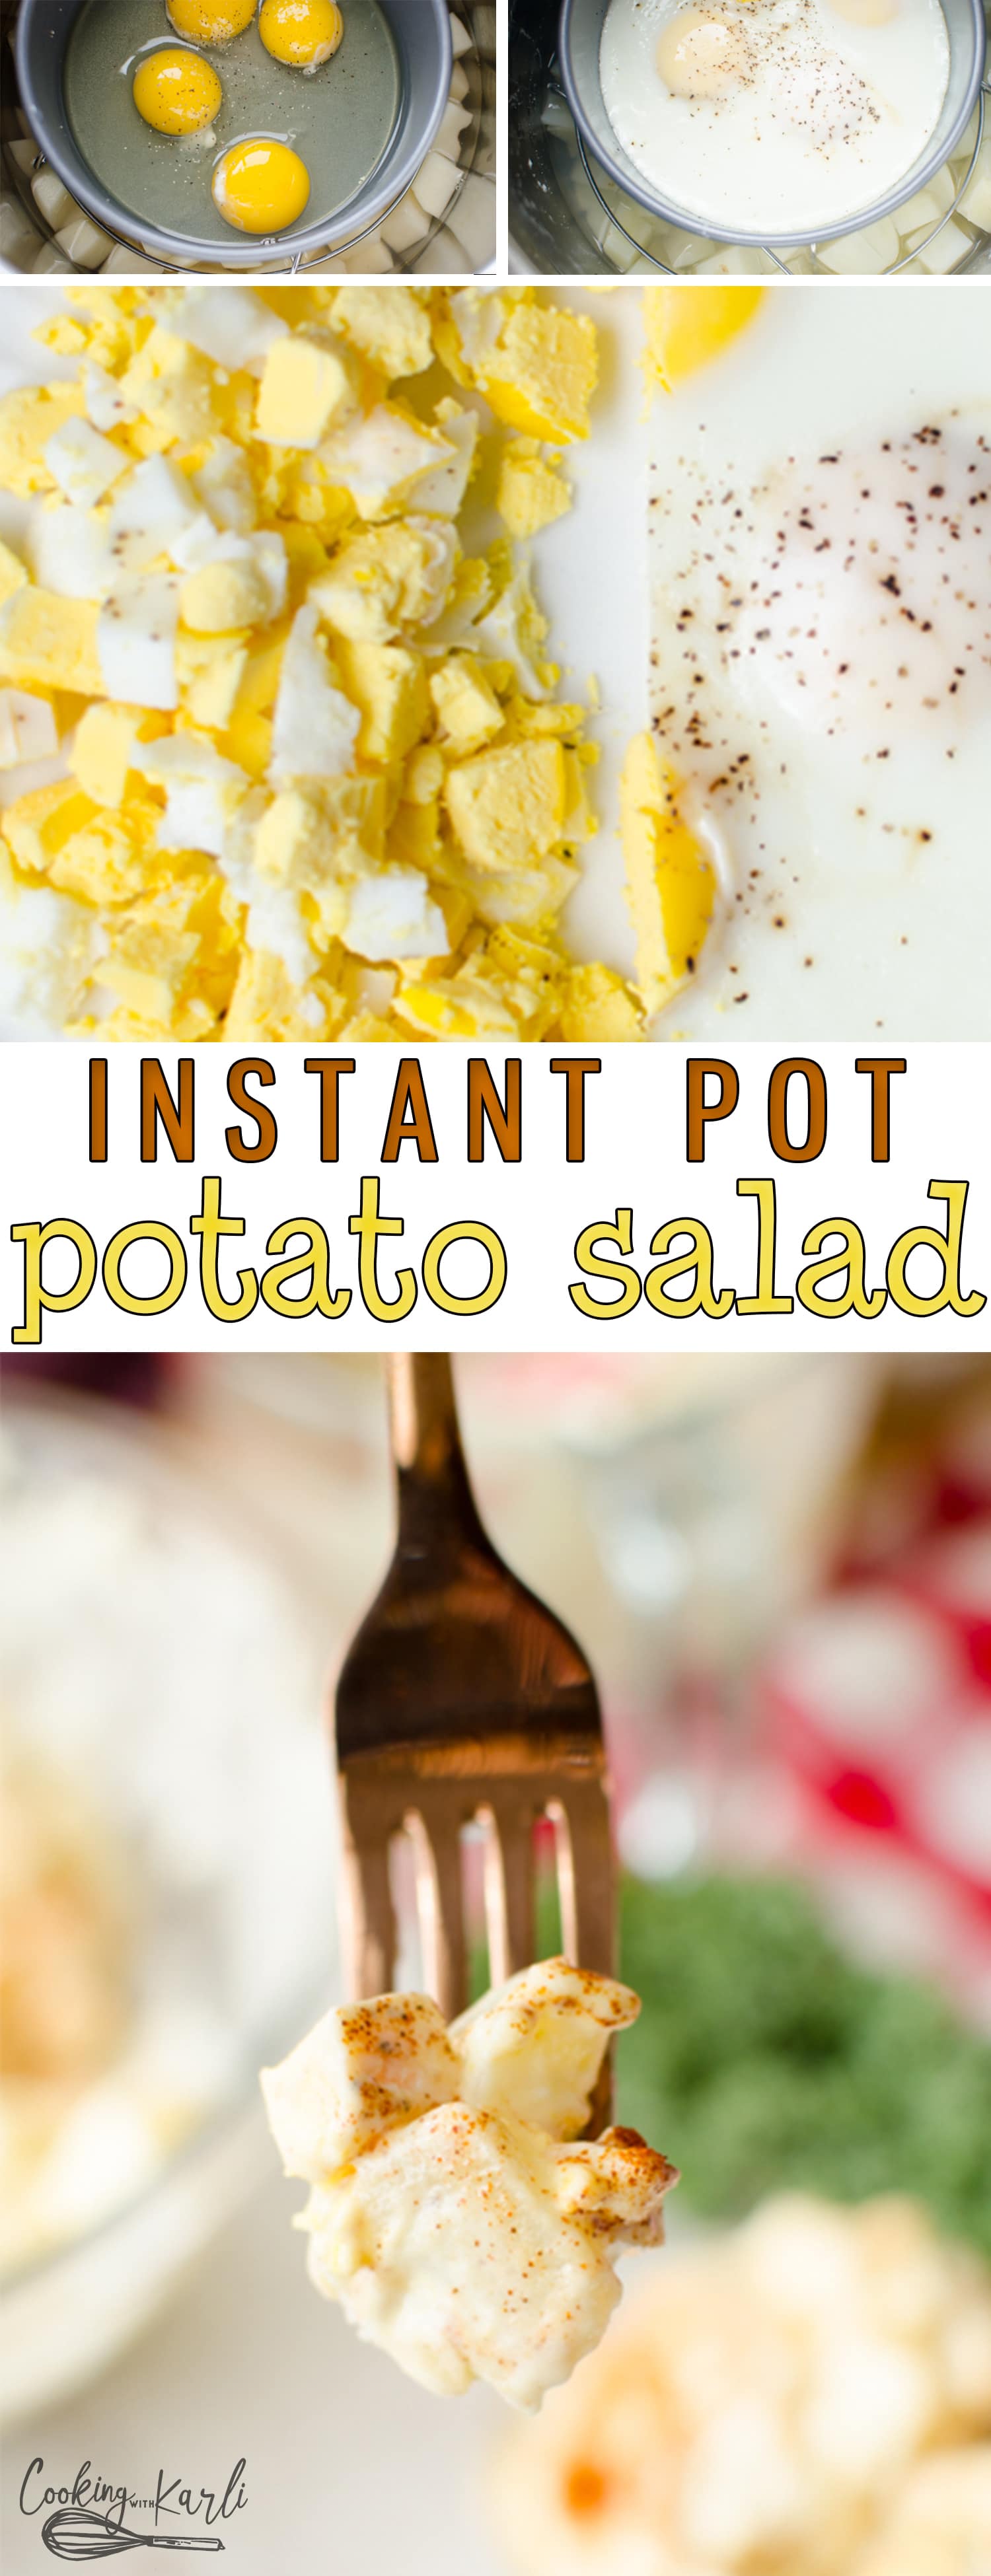 Classic Potato Salad is creamy, tangy and delicious! The dressing is extra special with a surprise ingredient that really takes this salad to a whole new level! This recipe is one I grew up on, Mom's Potato Salad!